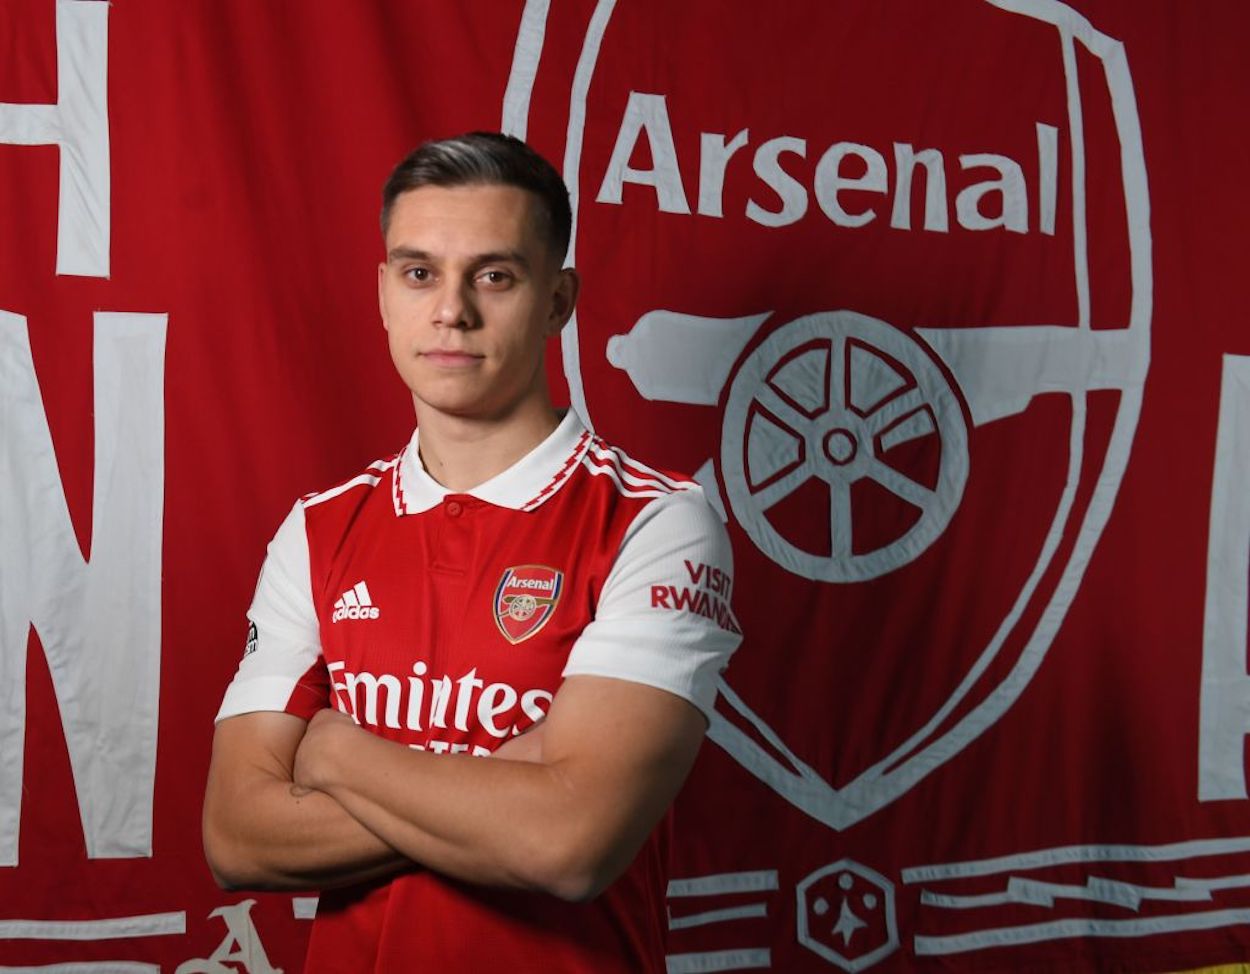 Arsenal unveil their new signing, Leandro Trossard.